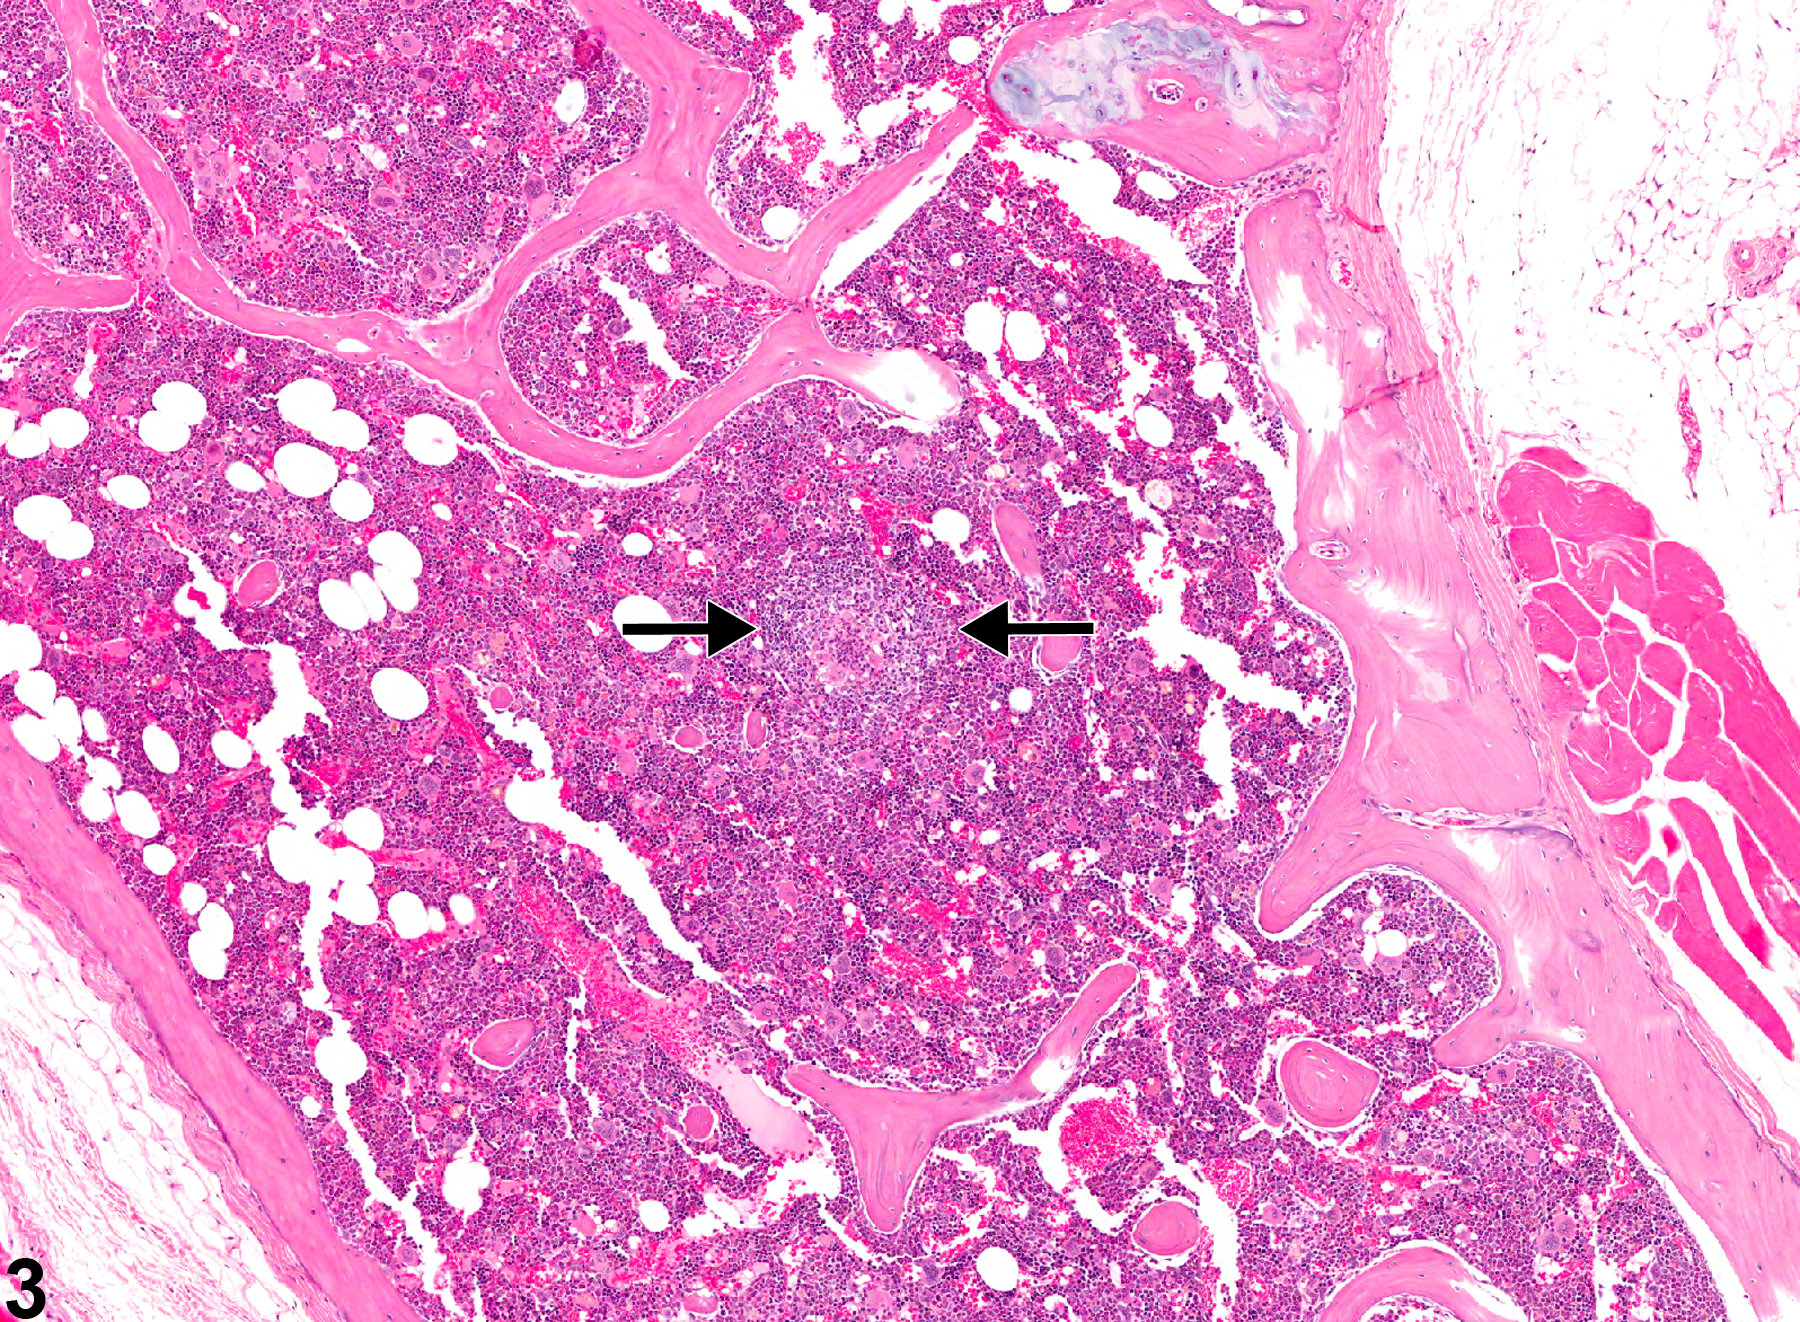 Image of inflammation in the bone marrow from a male B6C3F1 mouse in a chronic study